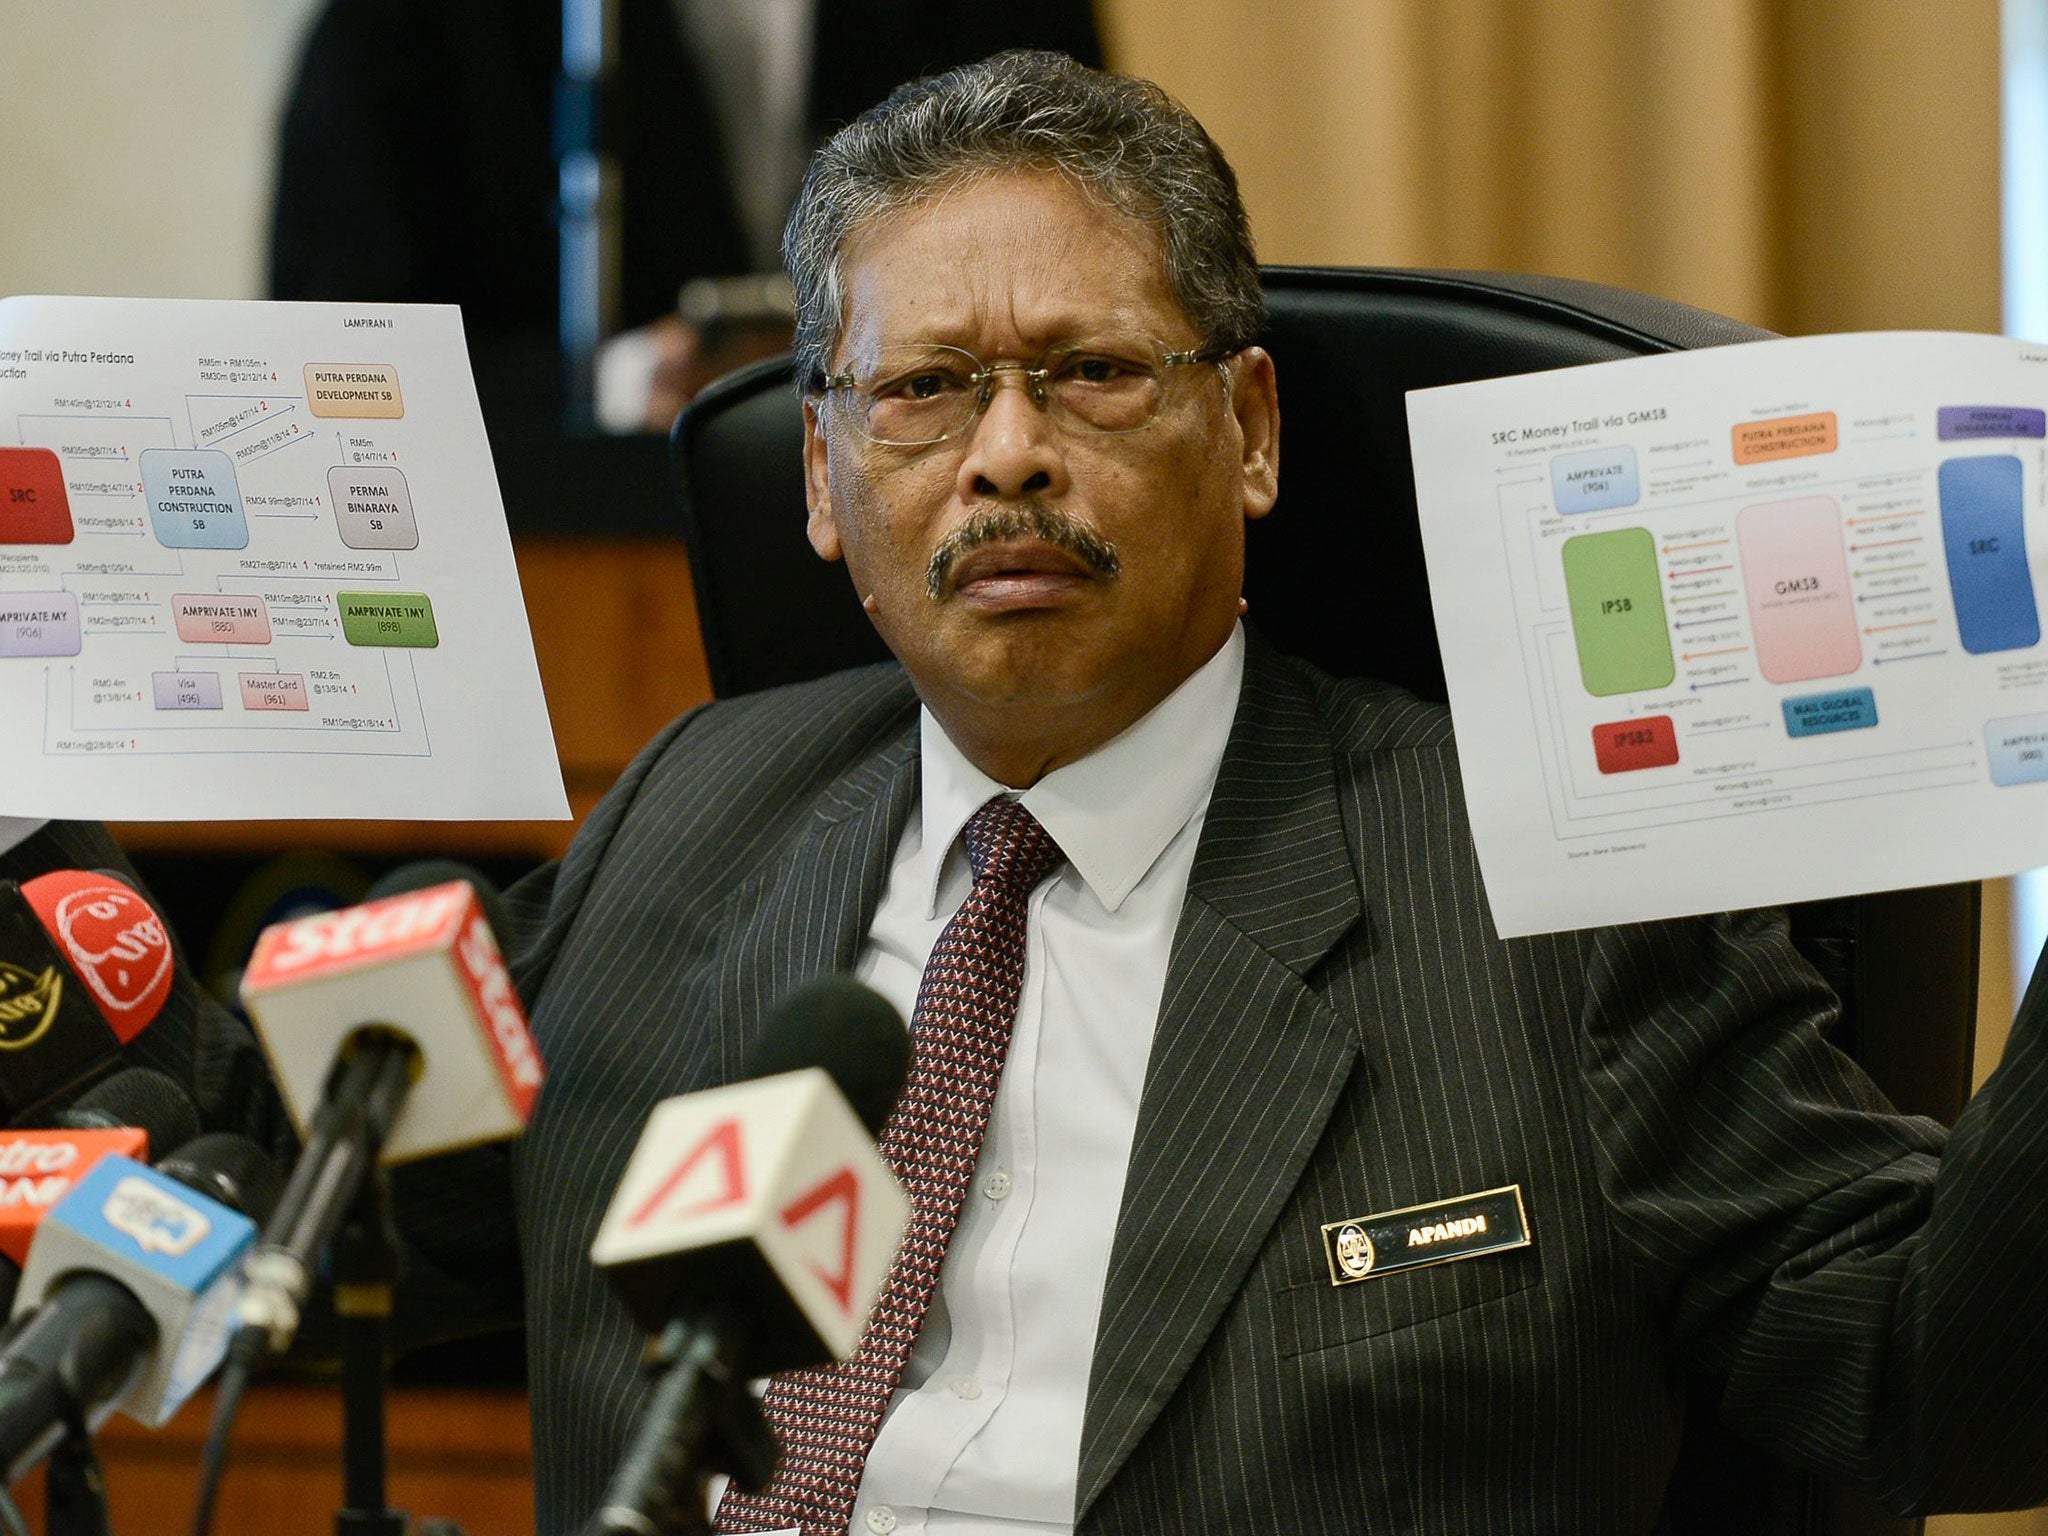 Malaysia's Attorney-General, Mohamed Apandi Ali, cleared Prime Minister Najib Razak of any criminal wrongdoing over the hundreds of millions of dollars in political donations in his bank accounts